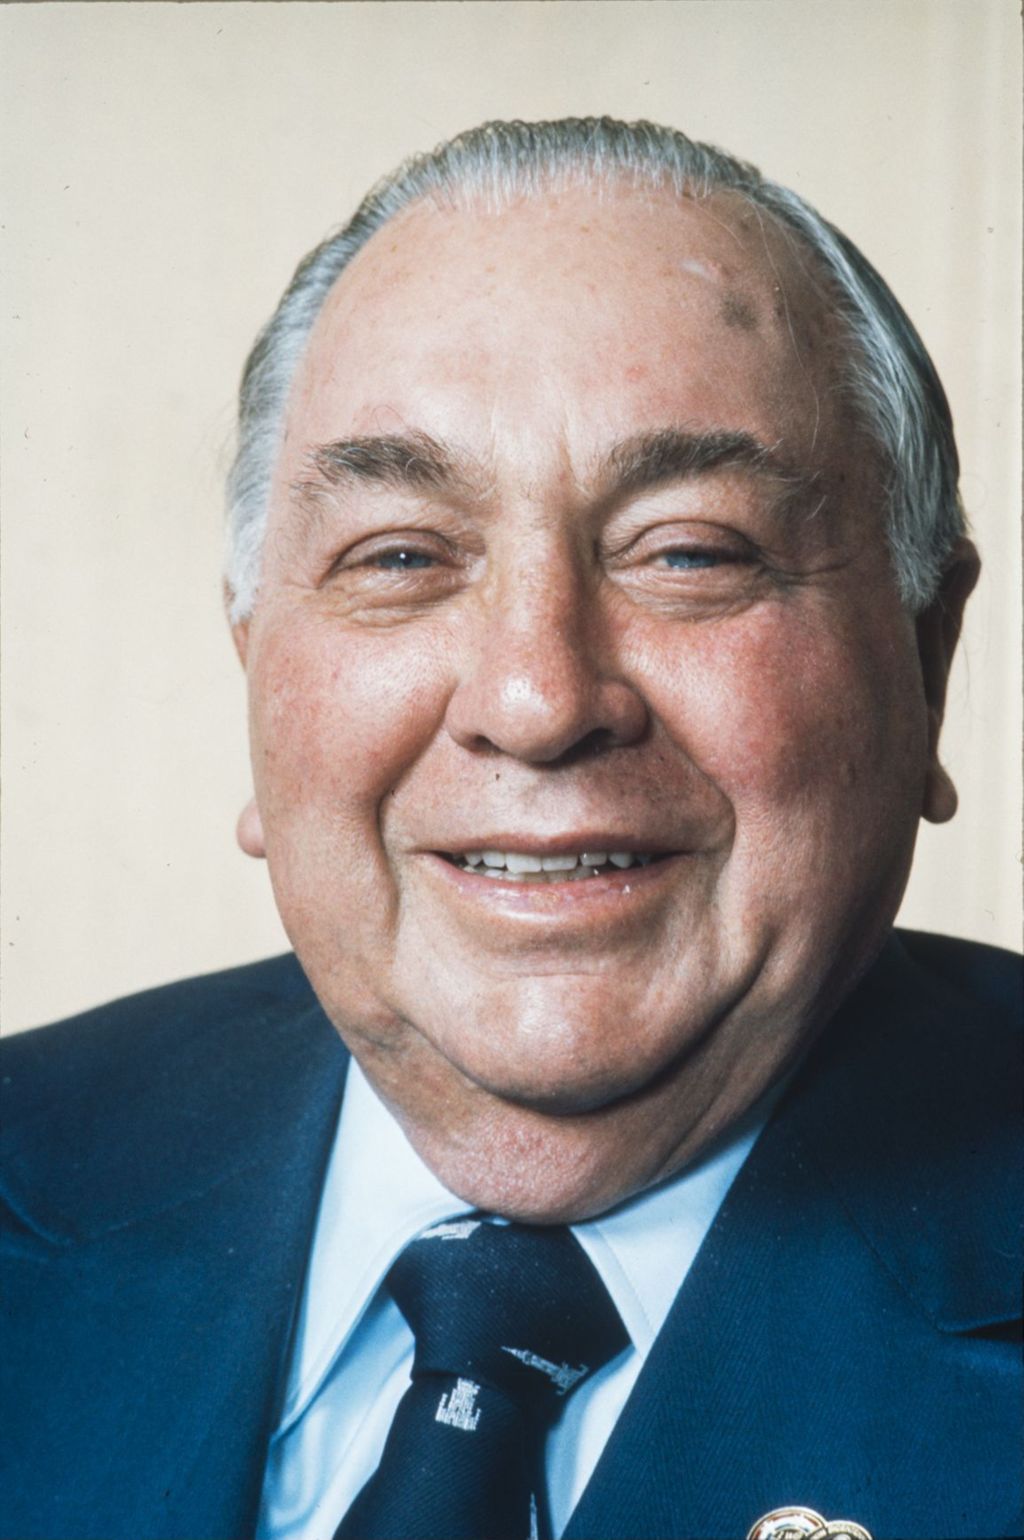 Portraits of Richard J. Daley in a dark blue suit and tie